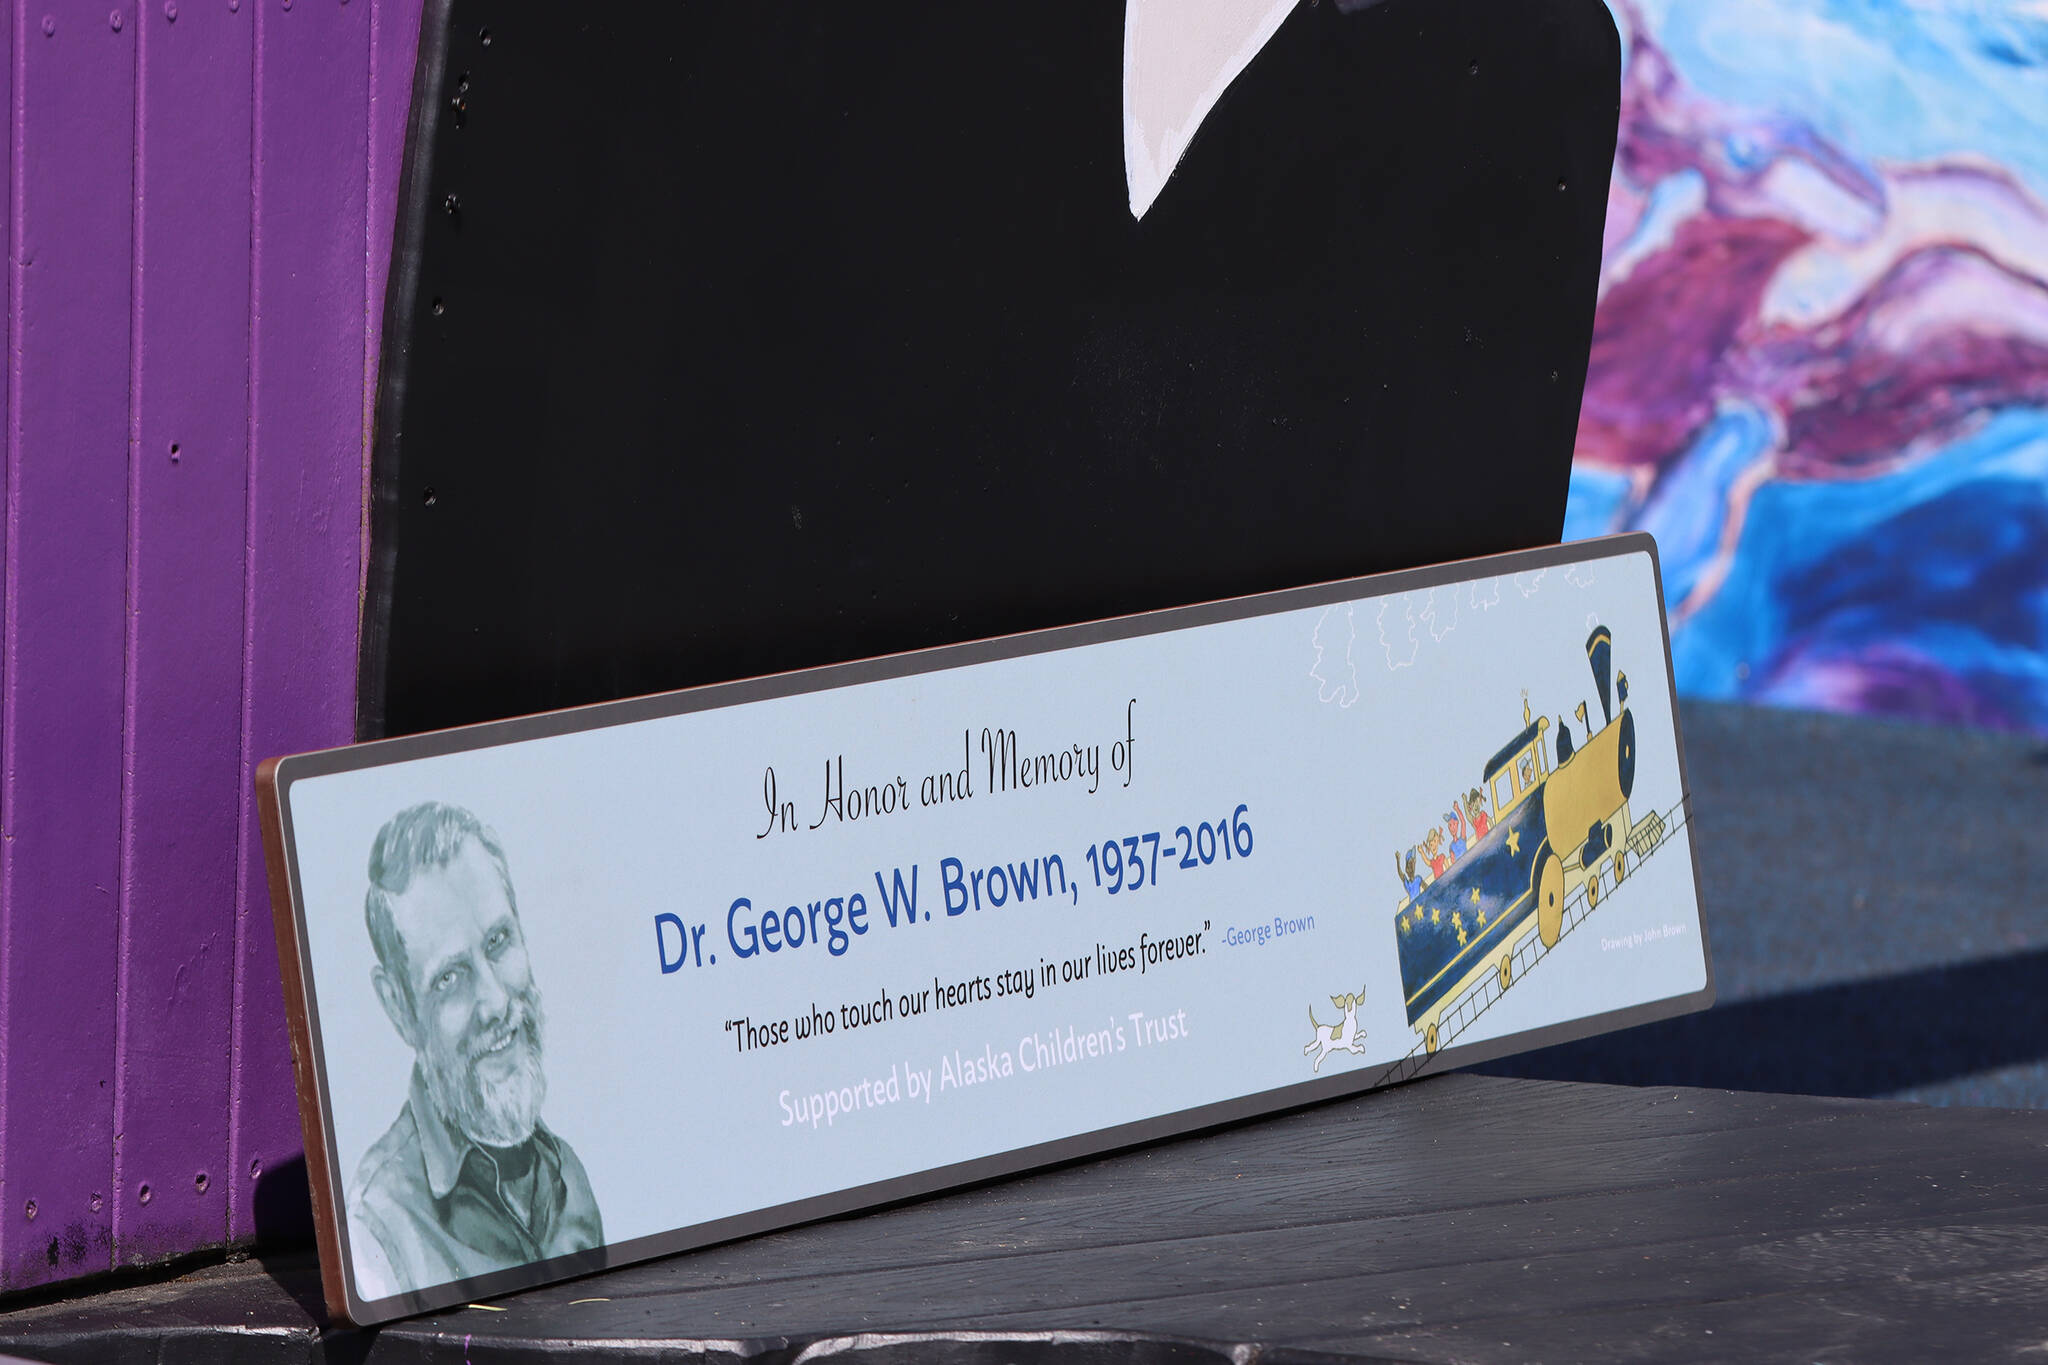 A plaque honoring Dr. George Brown was installed Saturday in Juneau’s Project Playground. The train on the plaque was created by John Brown, George Brown’s brother. John Brown traveled from Texas to attend the event. (Ben Hohenstatt / Juneau Empire)